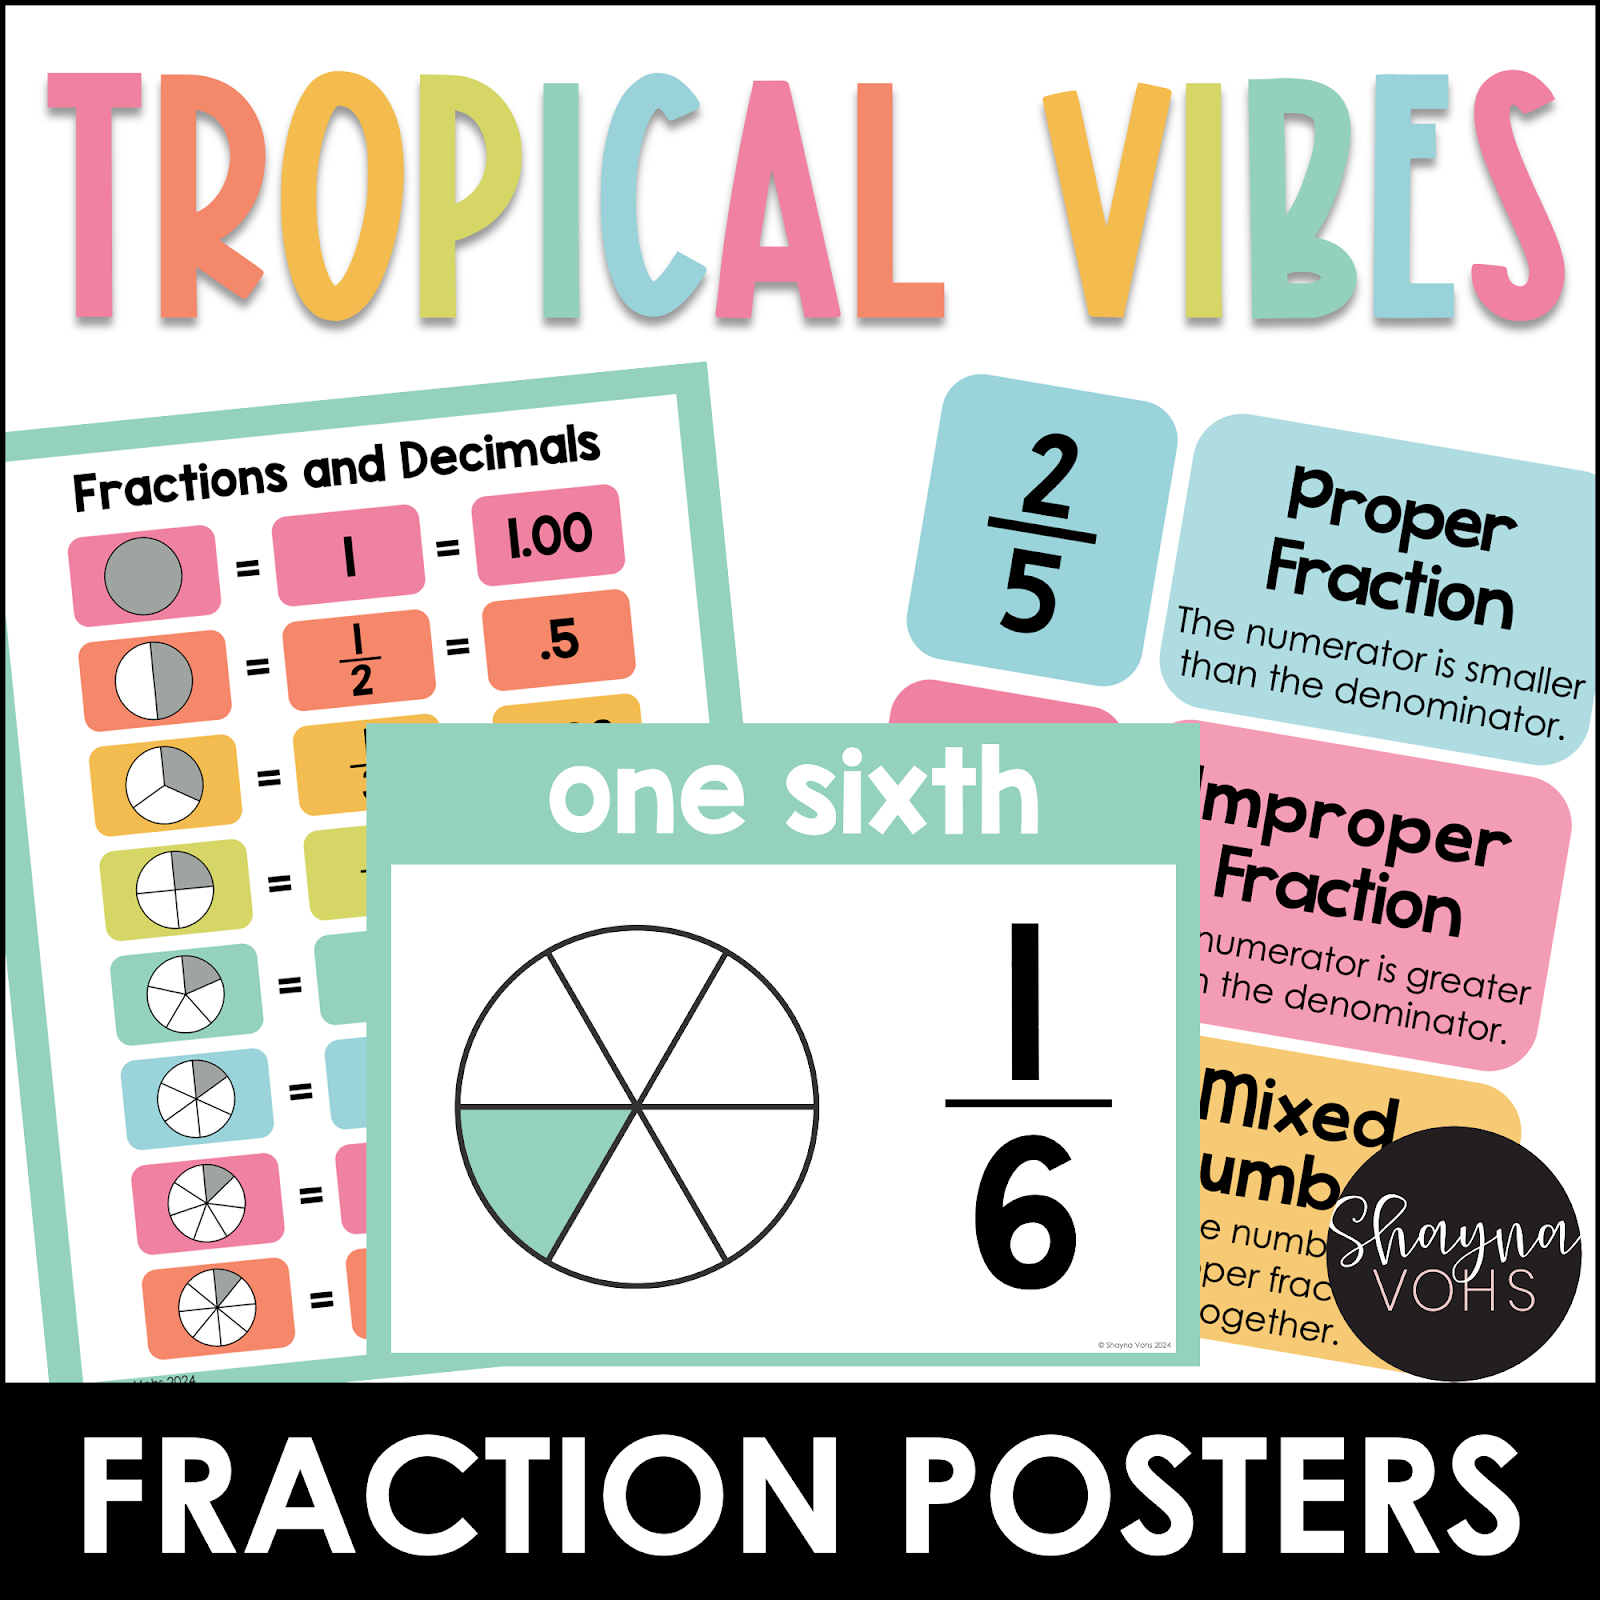 This image shows fraction anchor charts in a Tropical Vibes color scheme. 